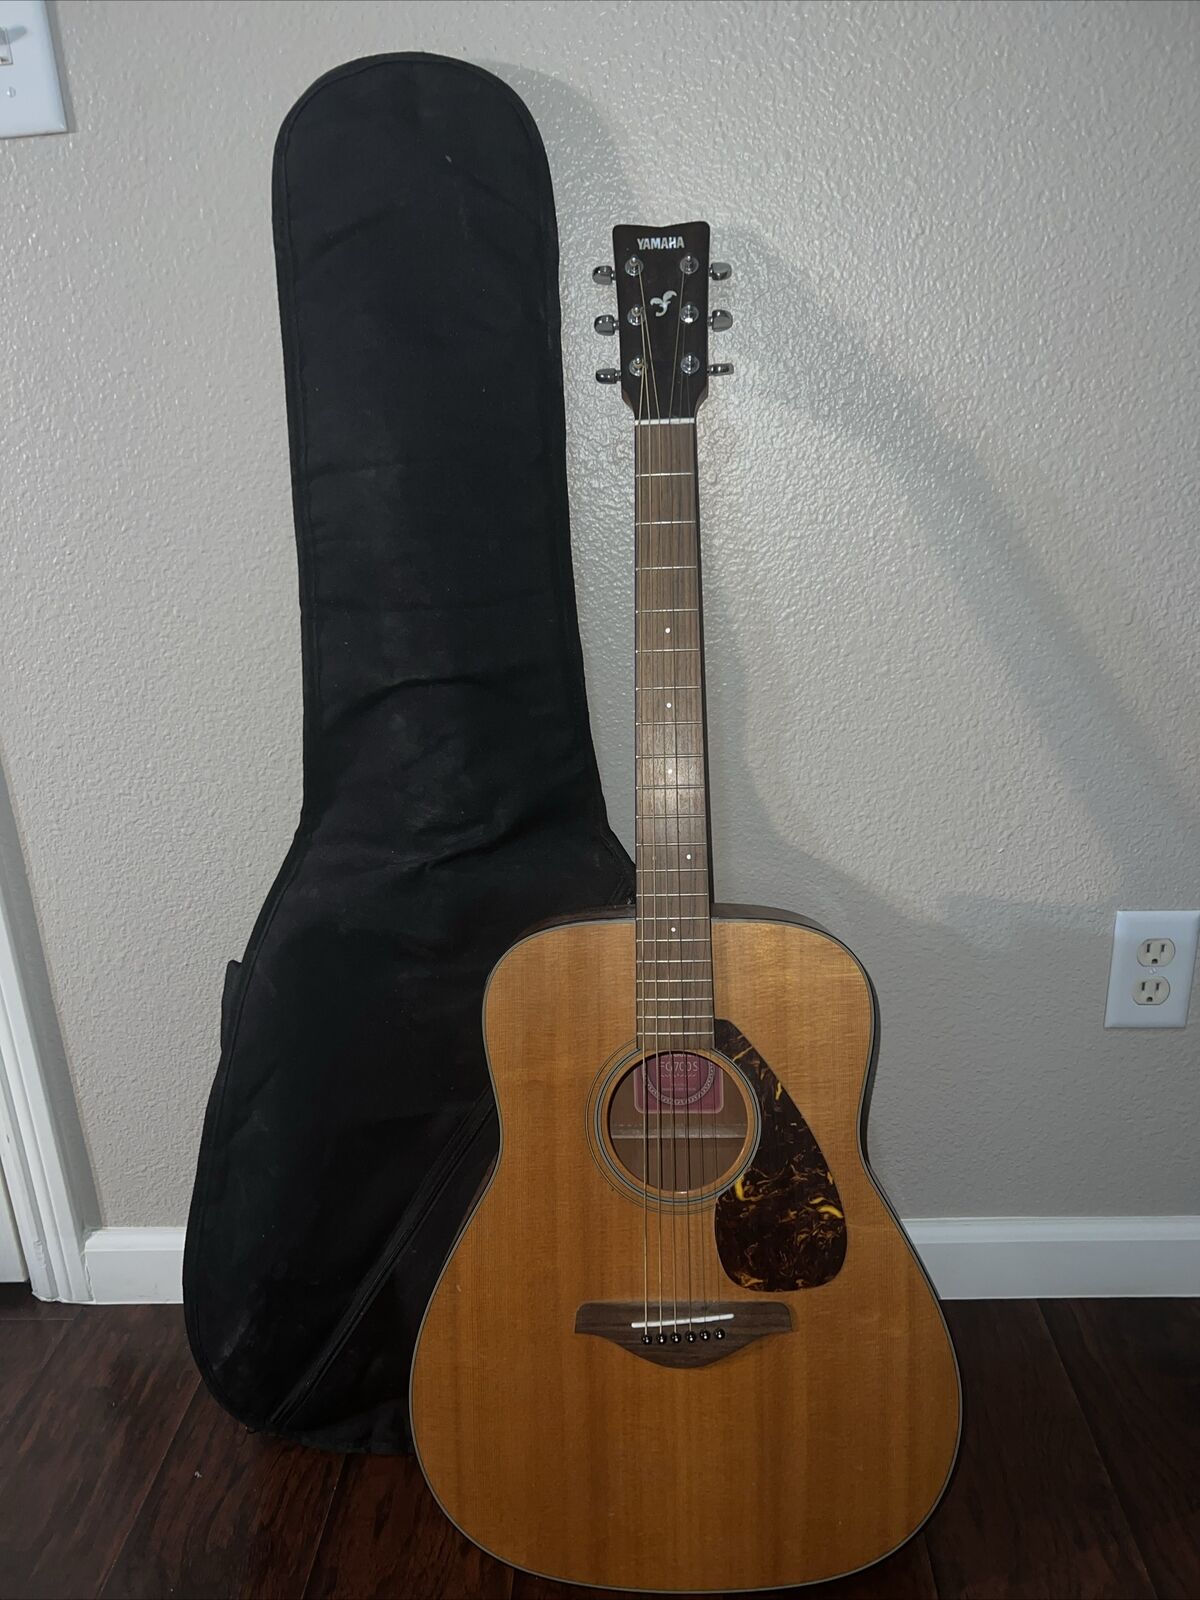 Yamaha FG-700S Acoustic Guitar w/ Carrying Case